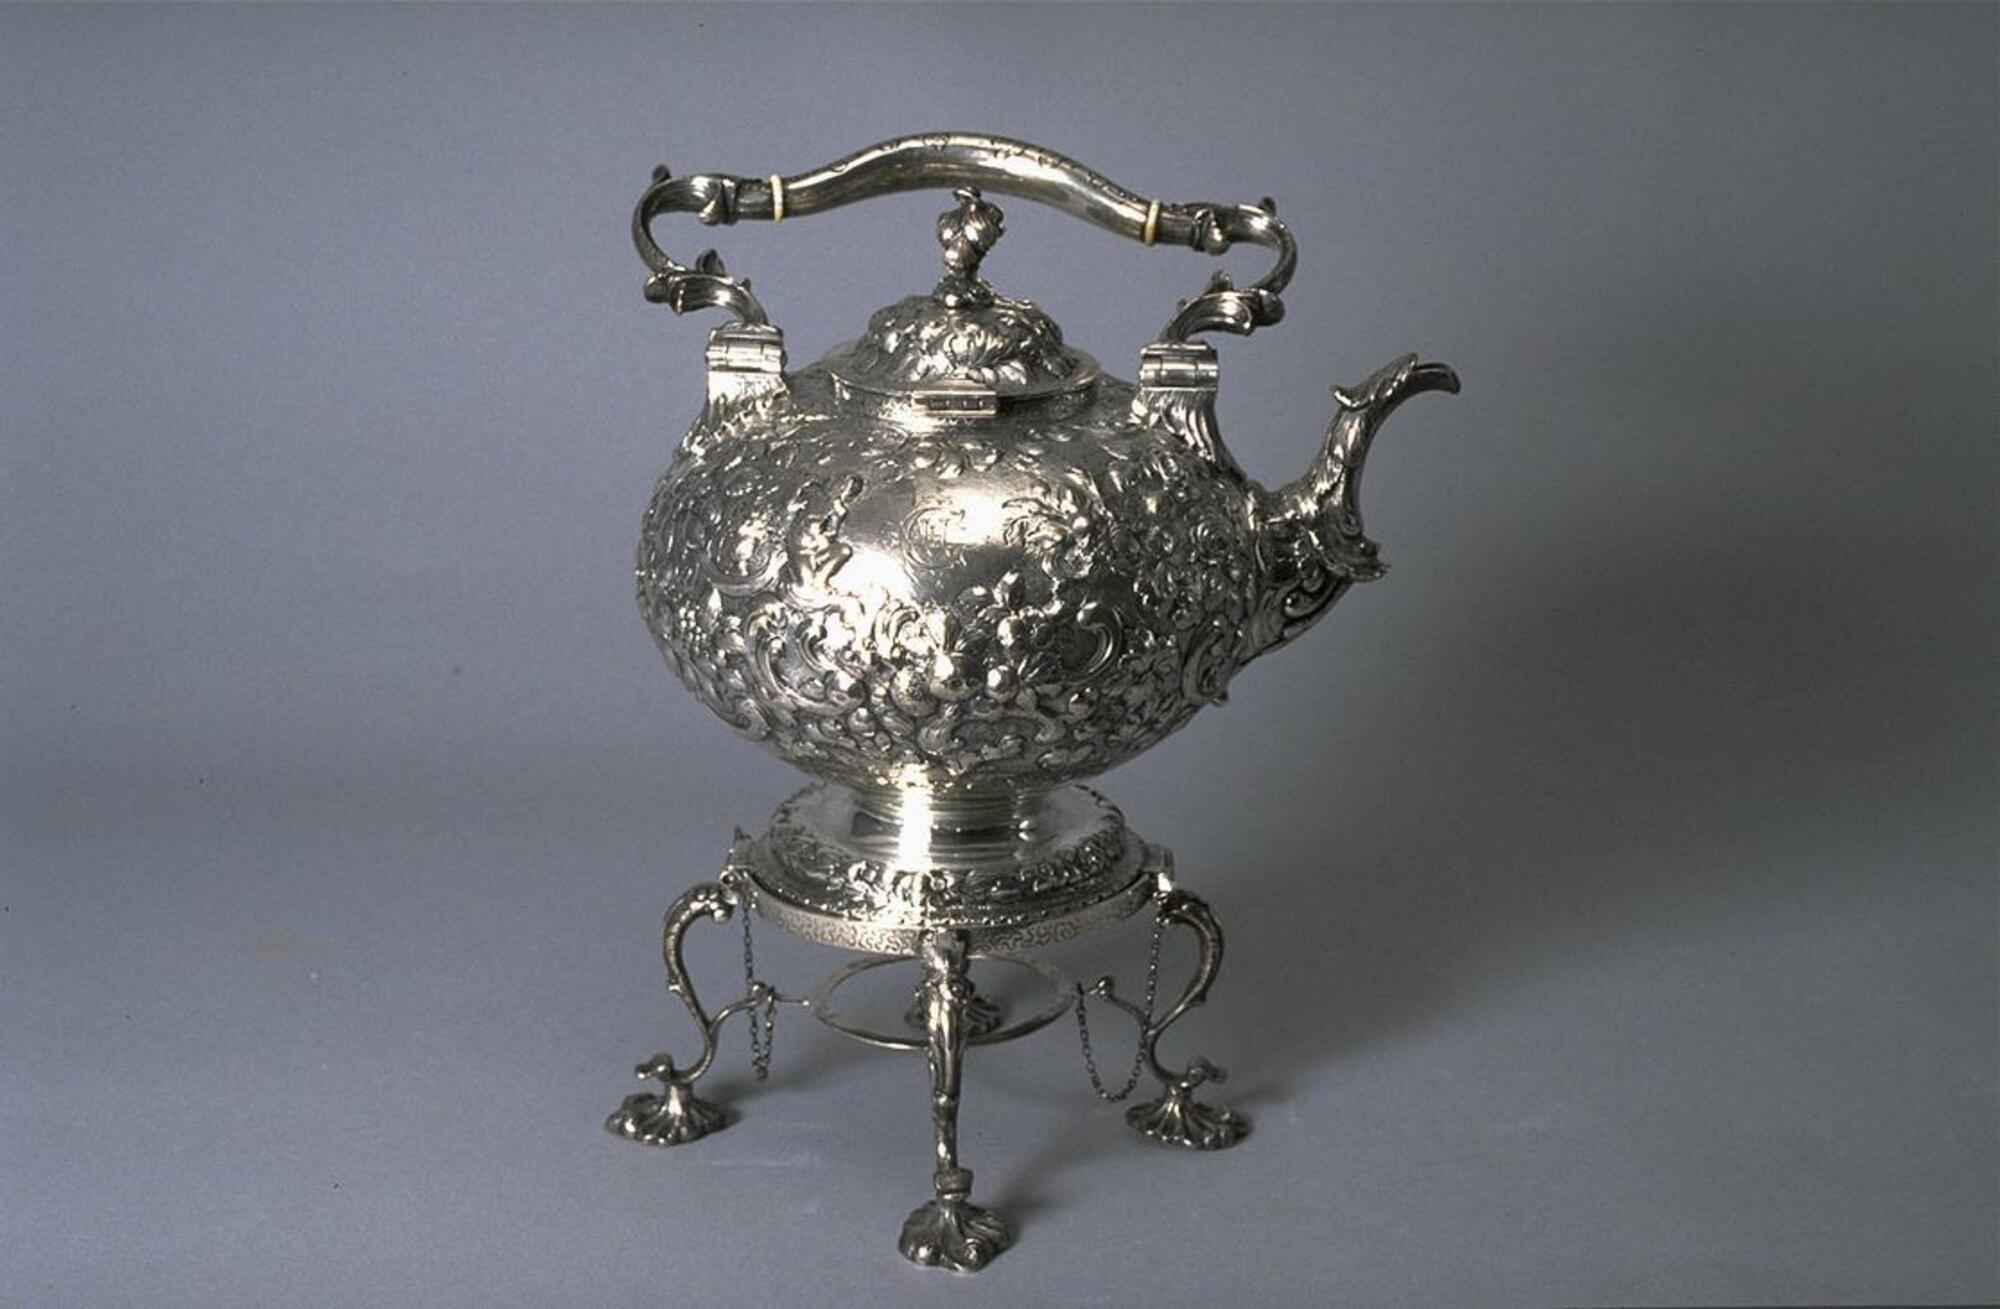 Silver teakettle and stand with hinged handle and opulent repouss&eacute; decoration